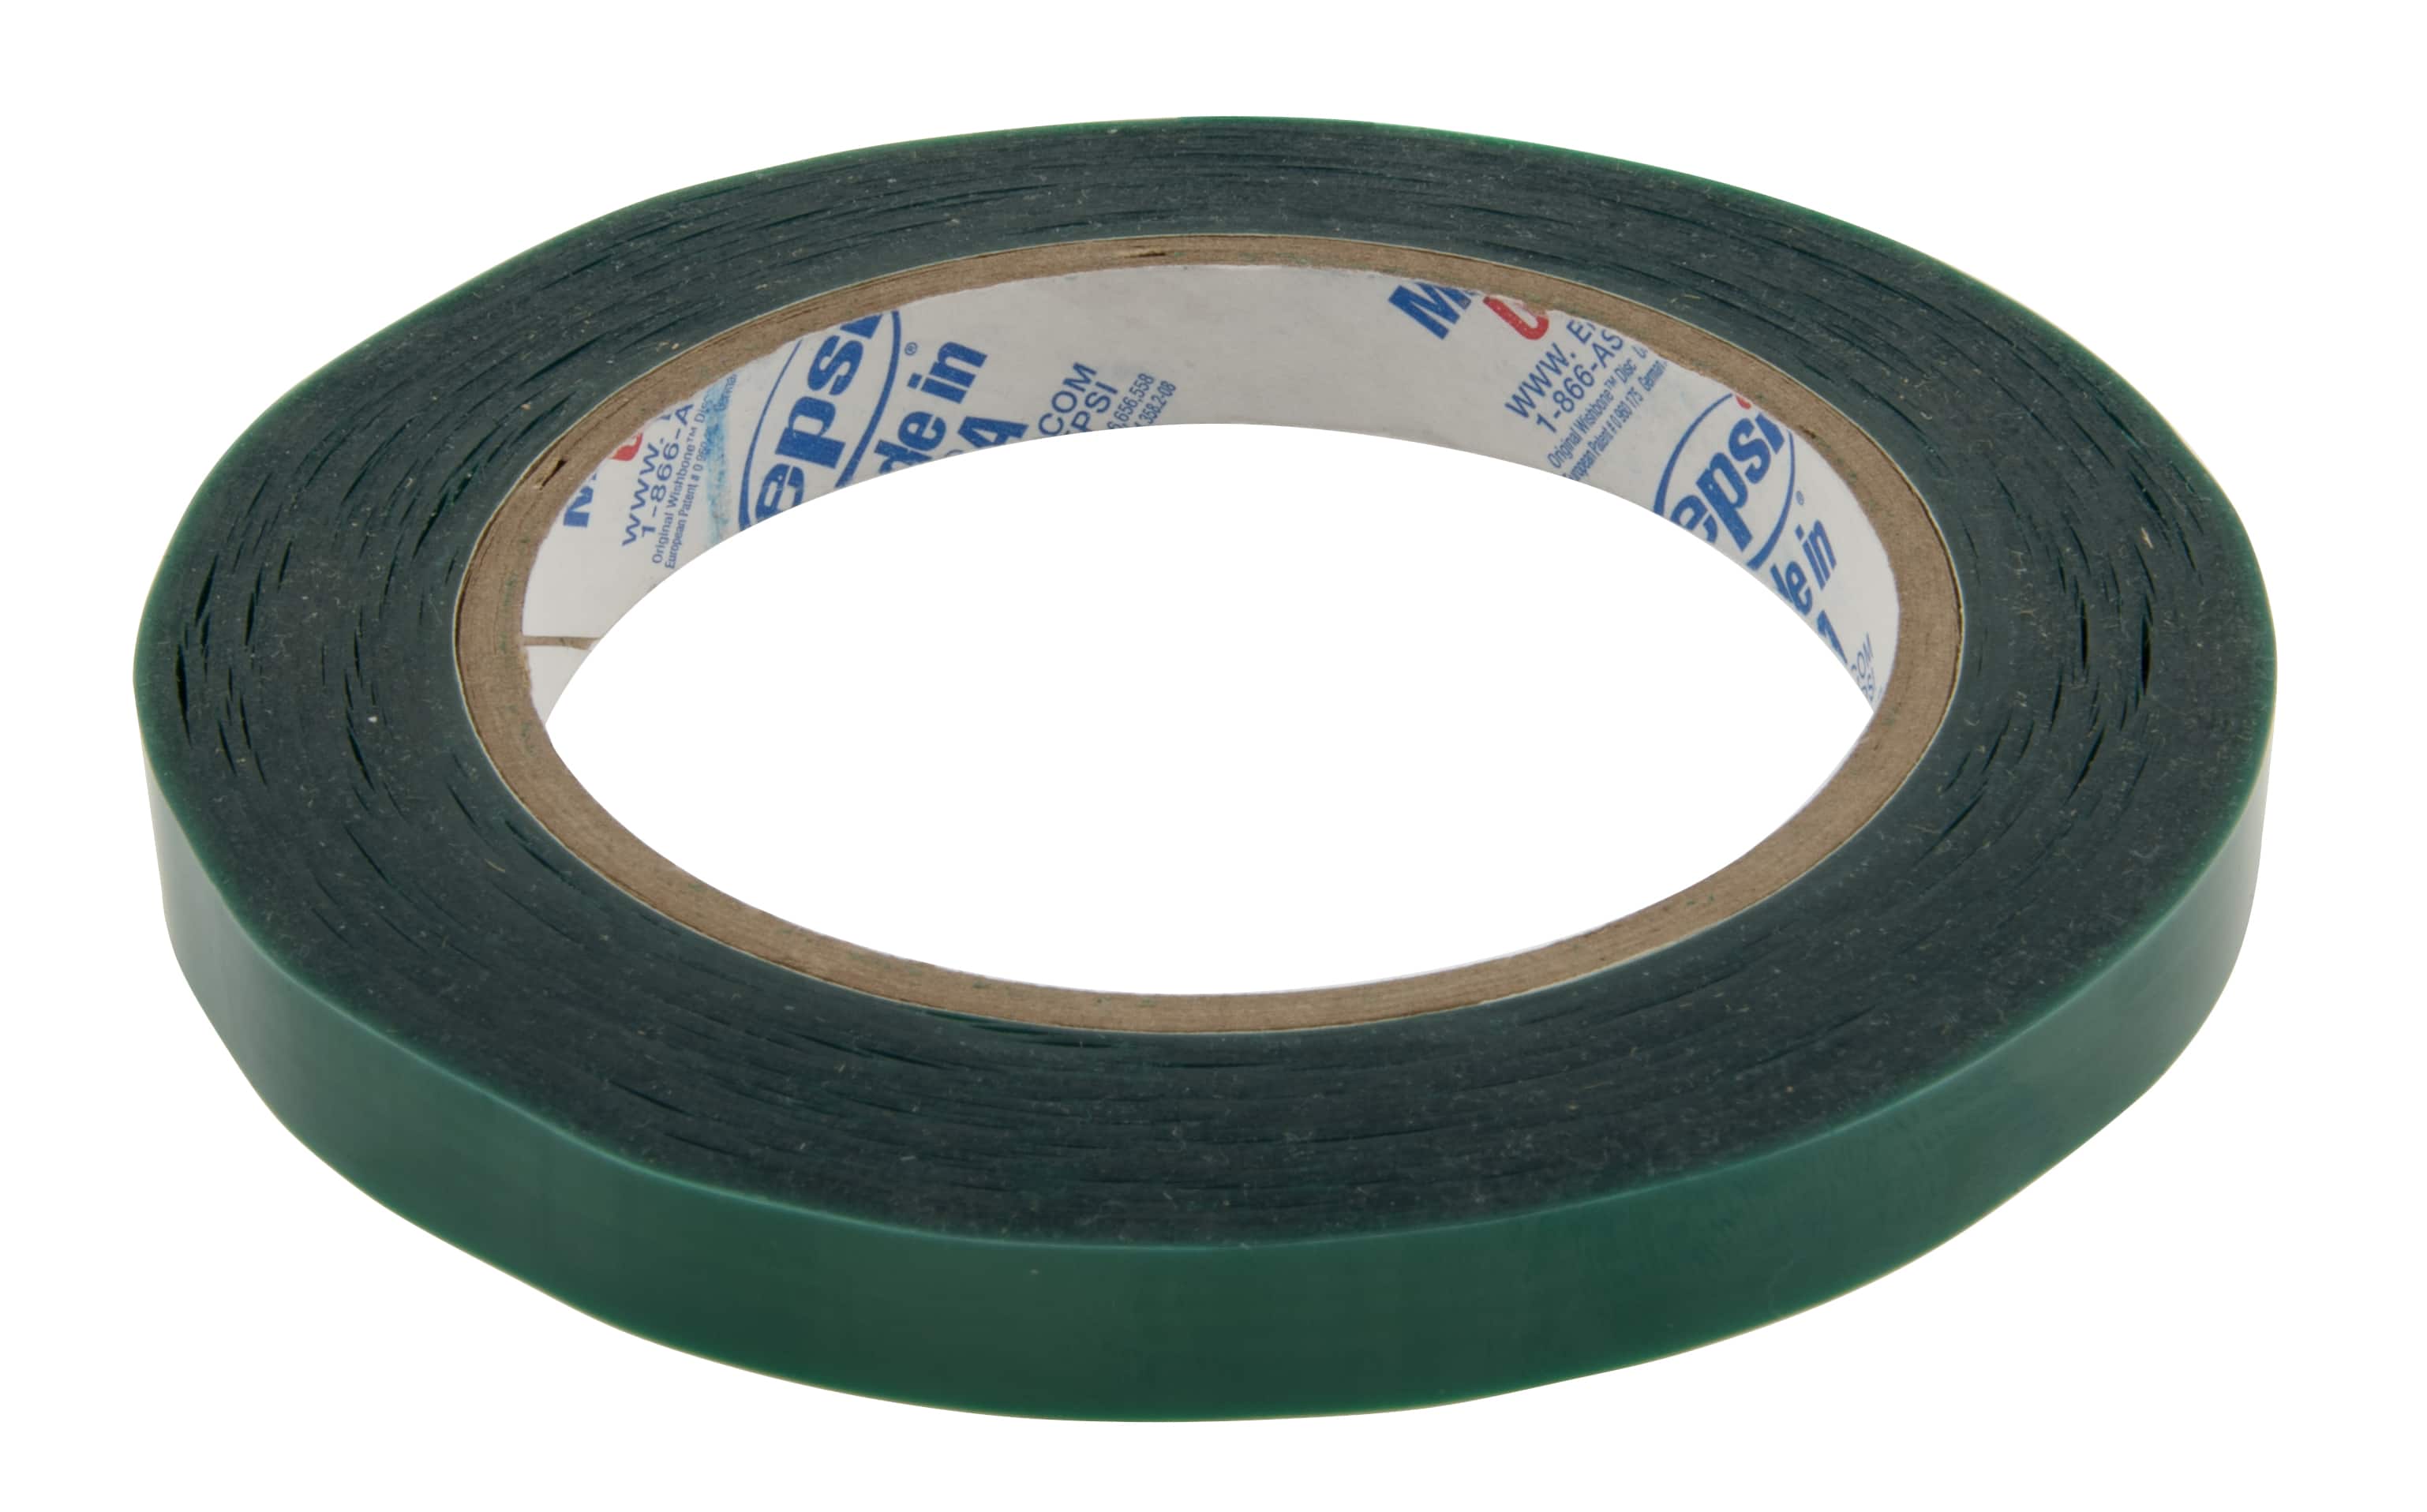 A12 Green Polyester Masking Tape